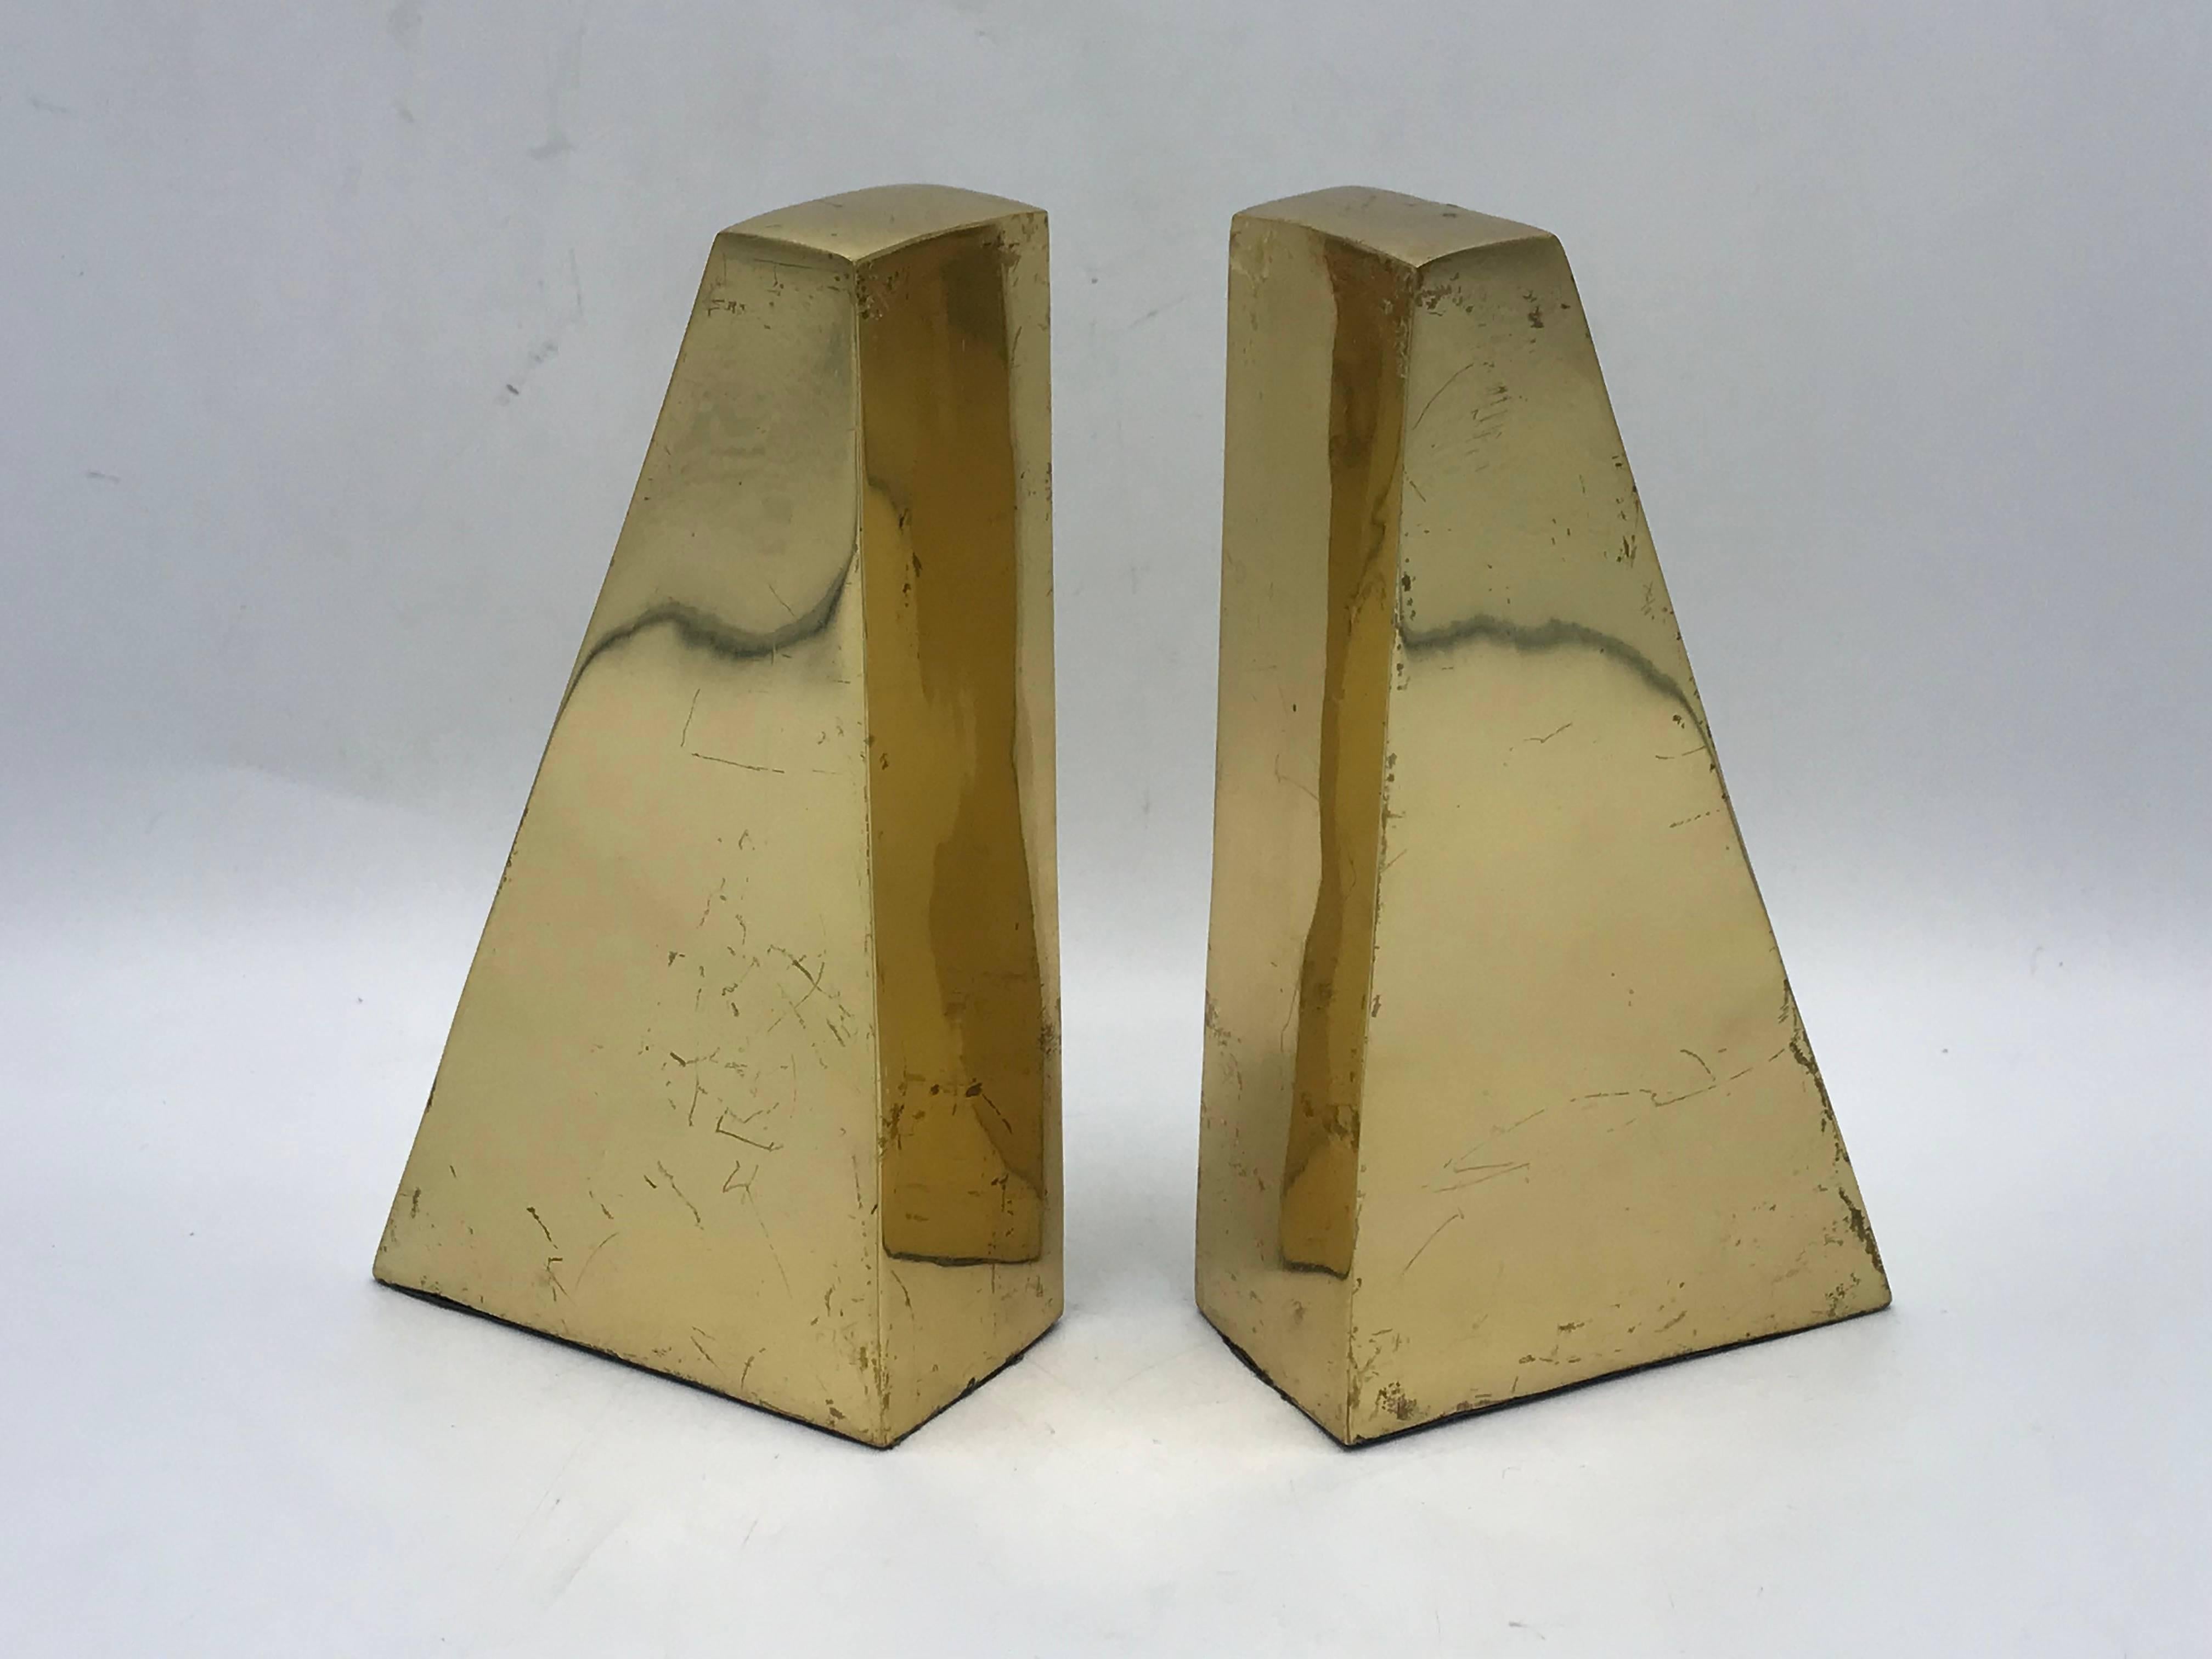 Listed is a stunning, pair of 1960s Italian brass bookends. The pieces are in a mirrored, minimal-modern triangular shapes. Extremely heavy, padded bottom.